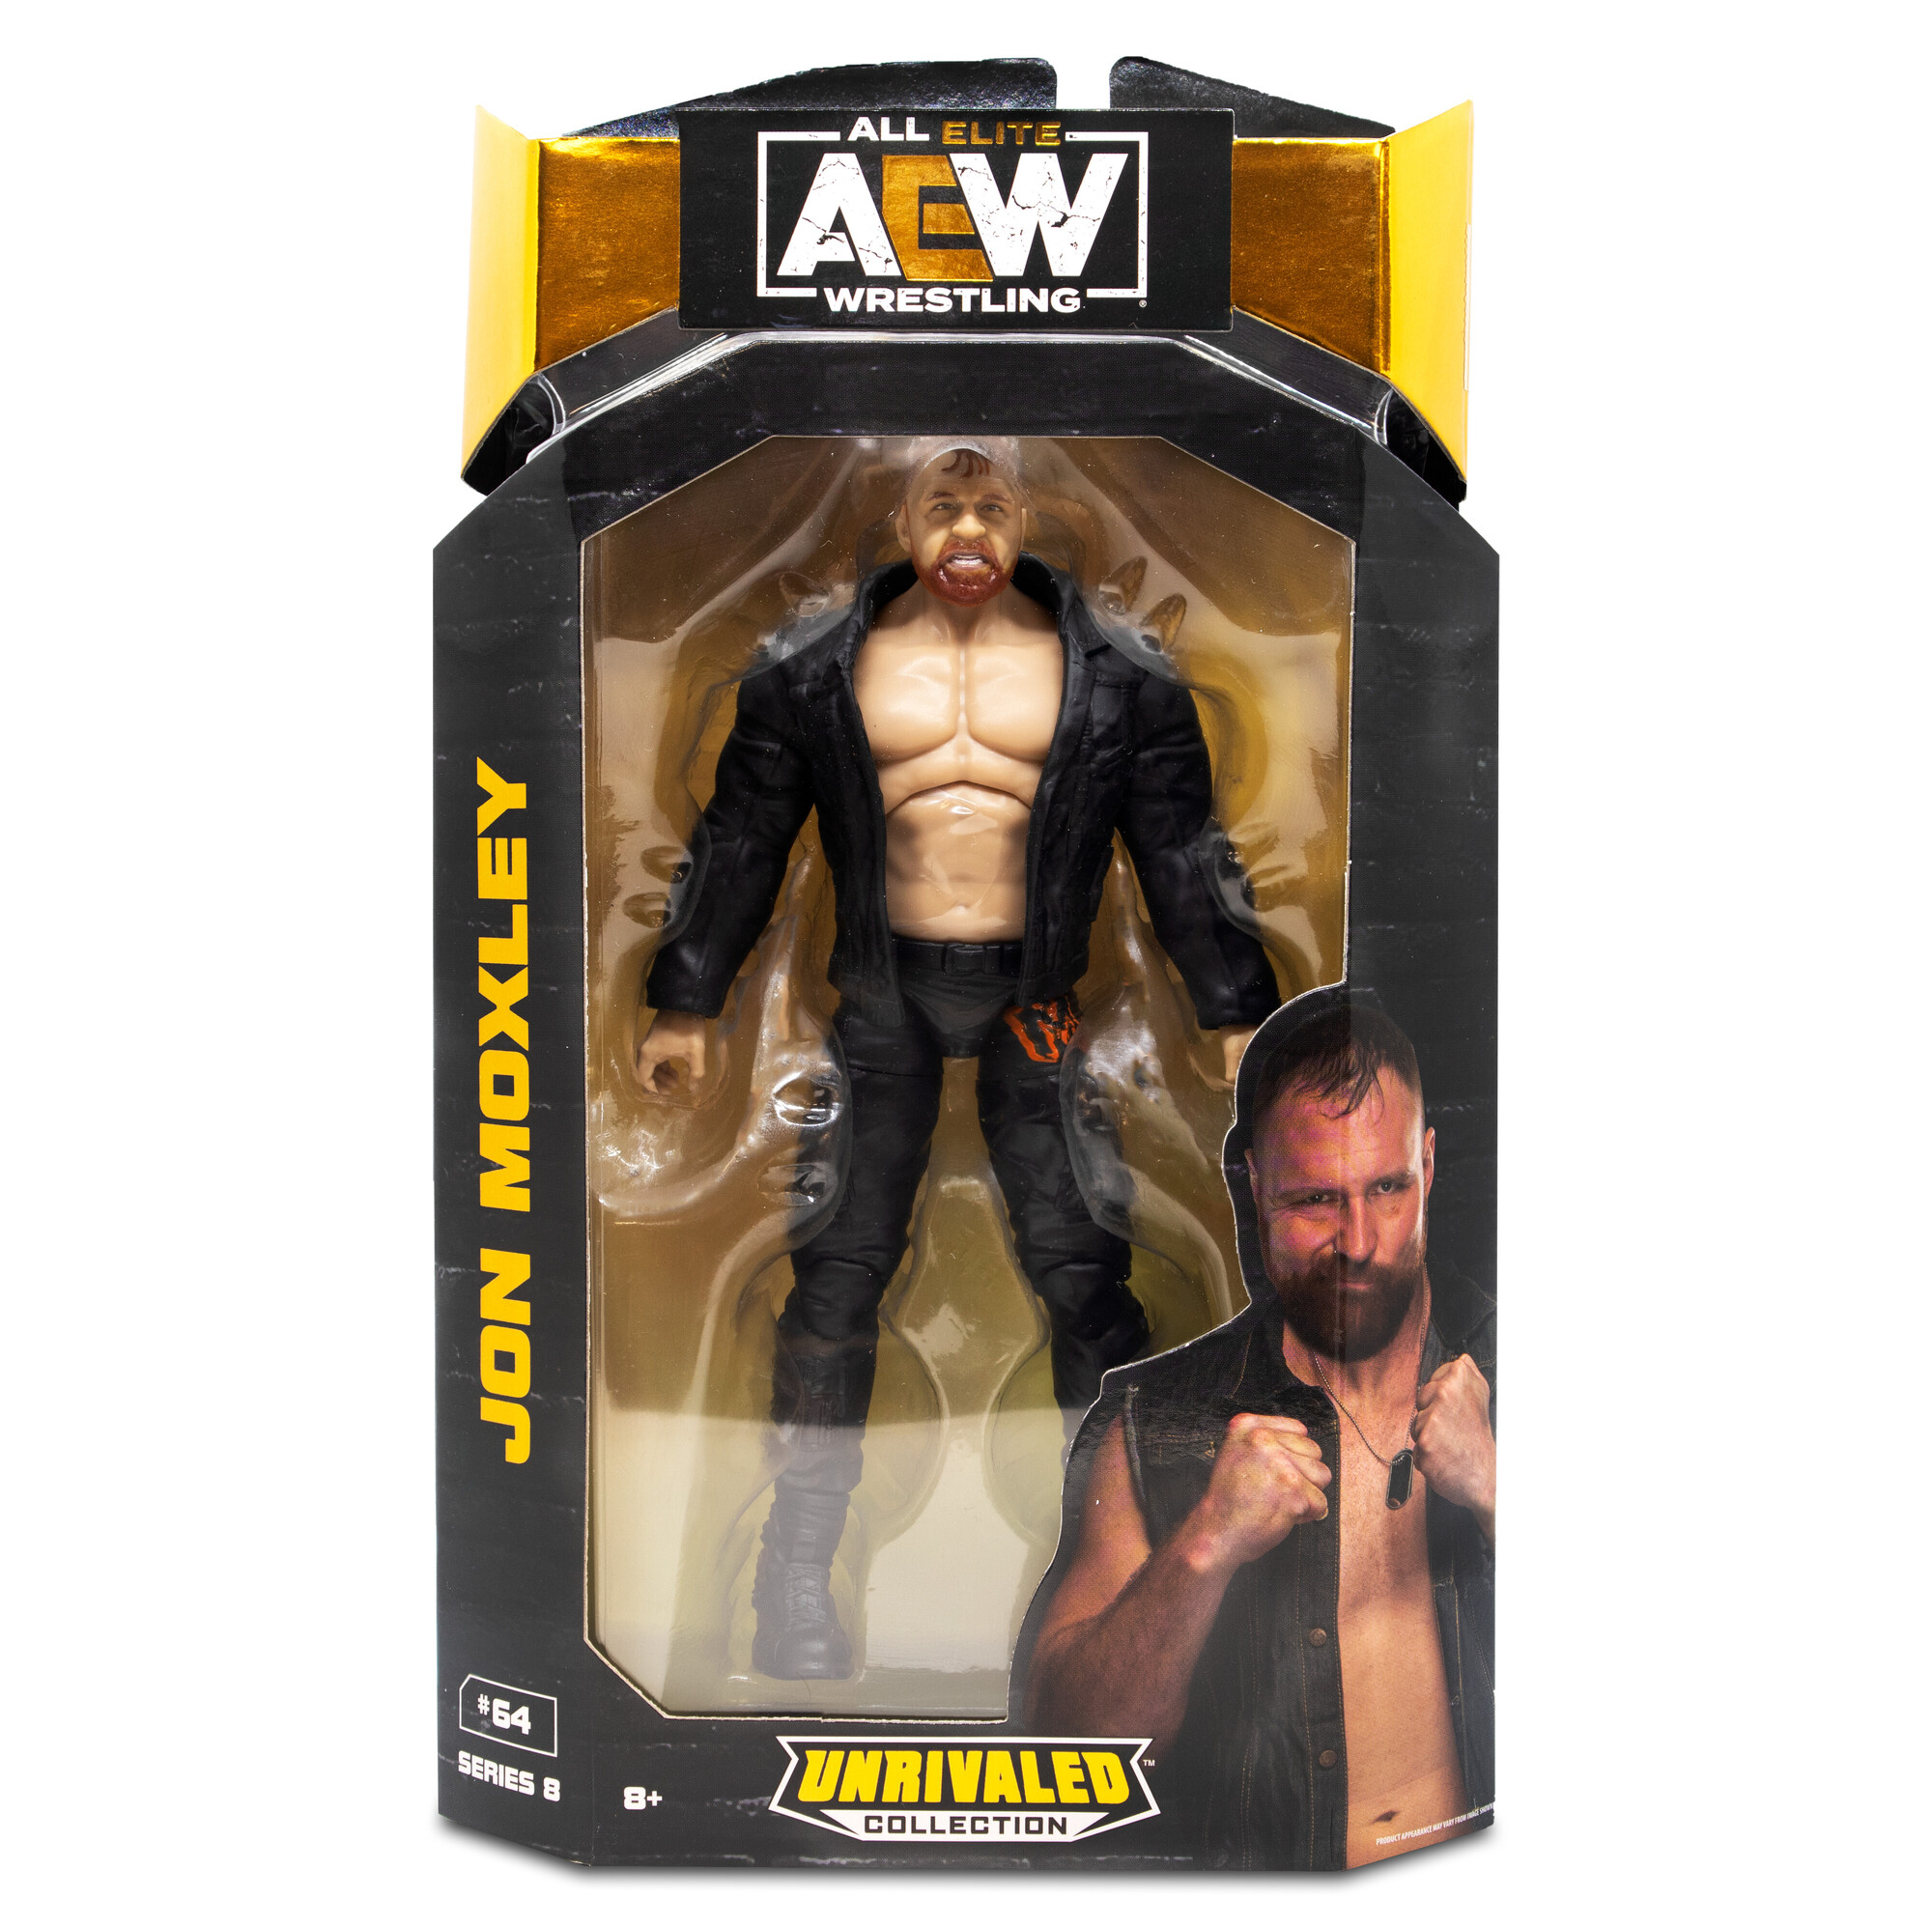 AEW All Elite Wrestling Unrivaled Collection Series 8 Jon Moxley Action Figure - image 1 of 5